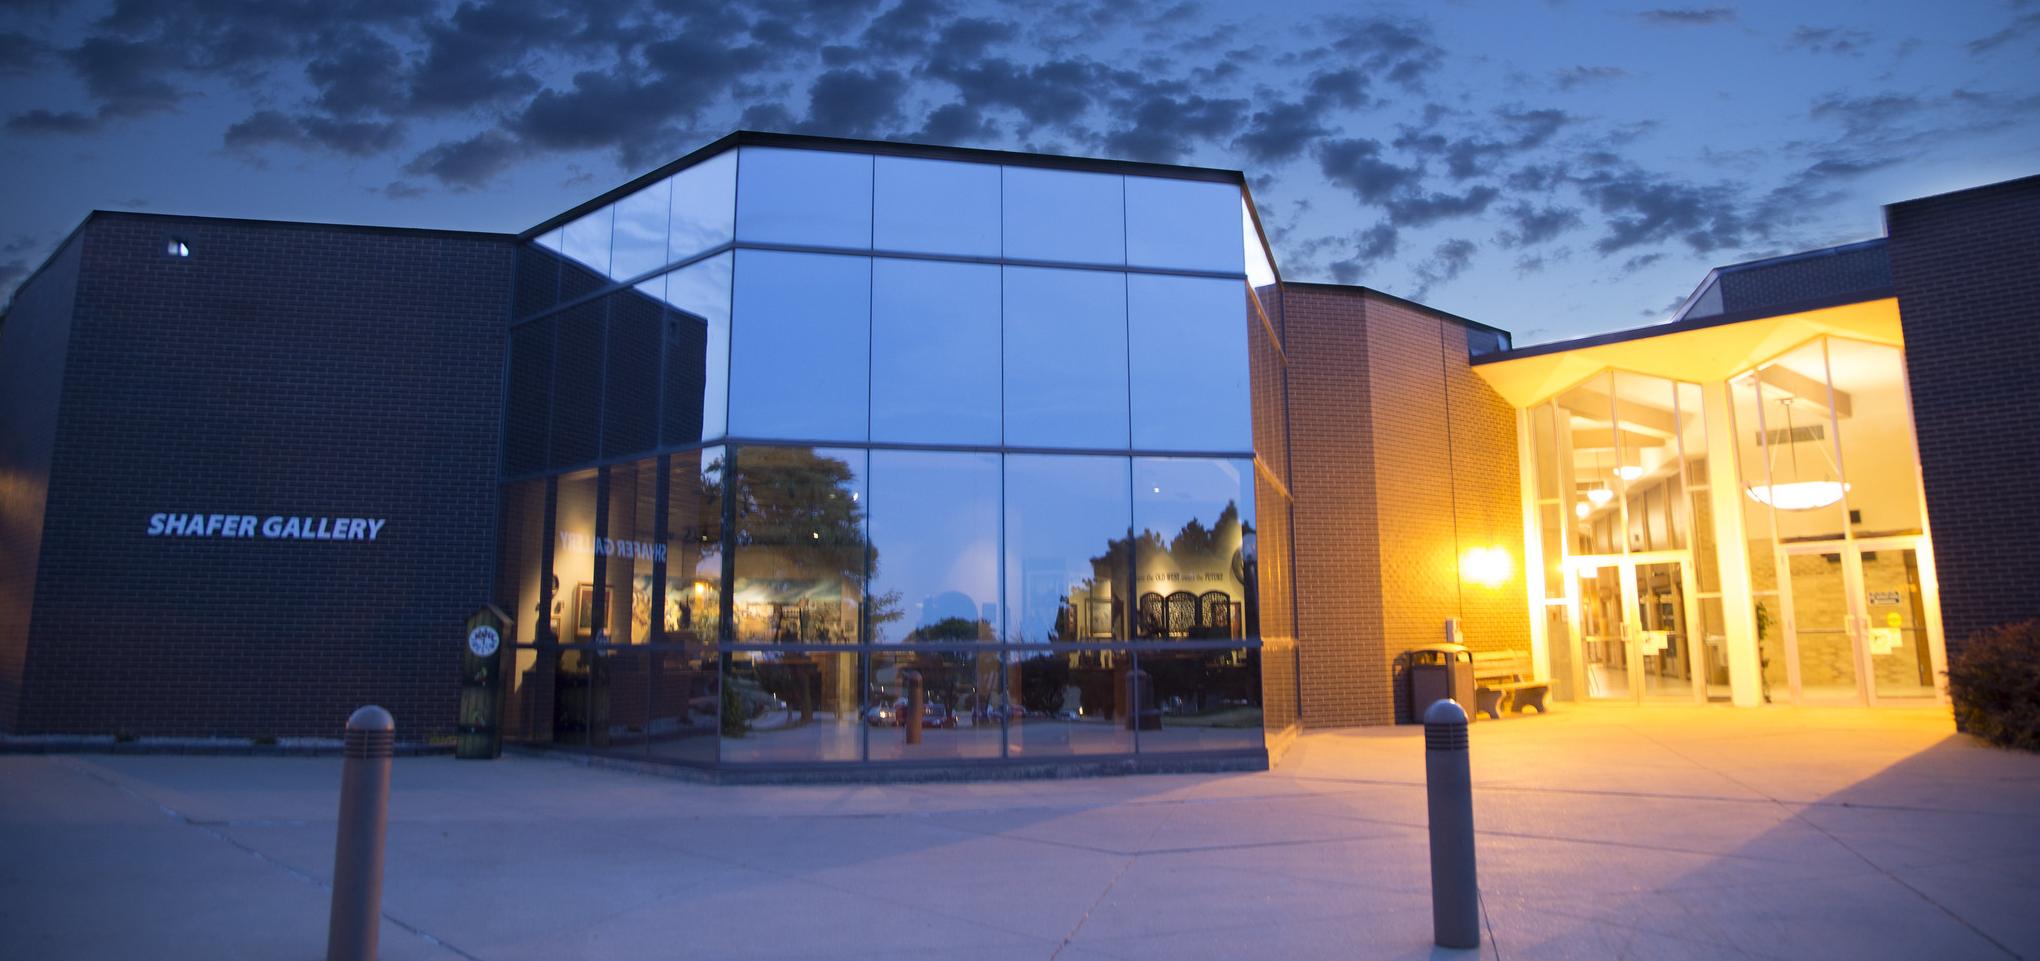 The Shafer Art Gallery building exterior at night